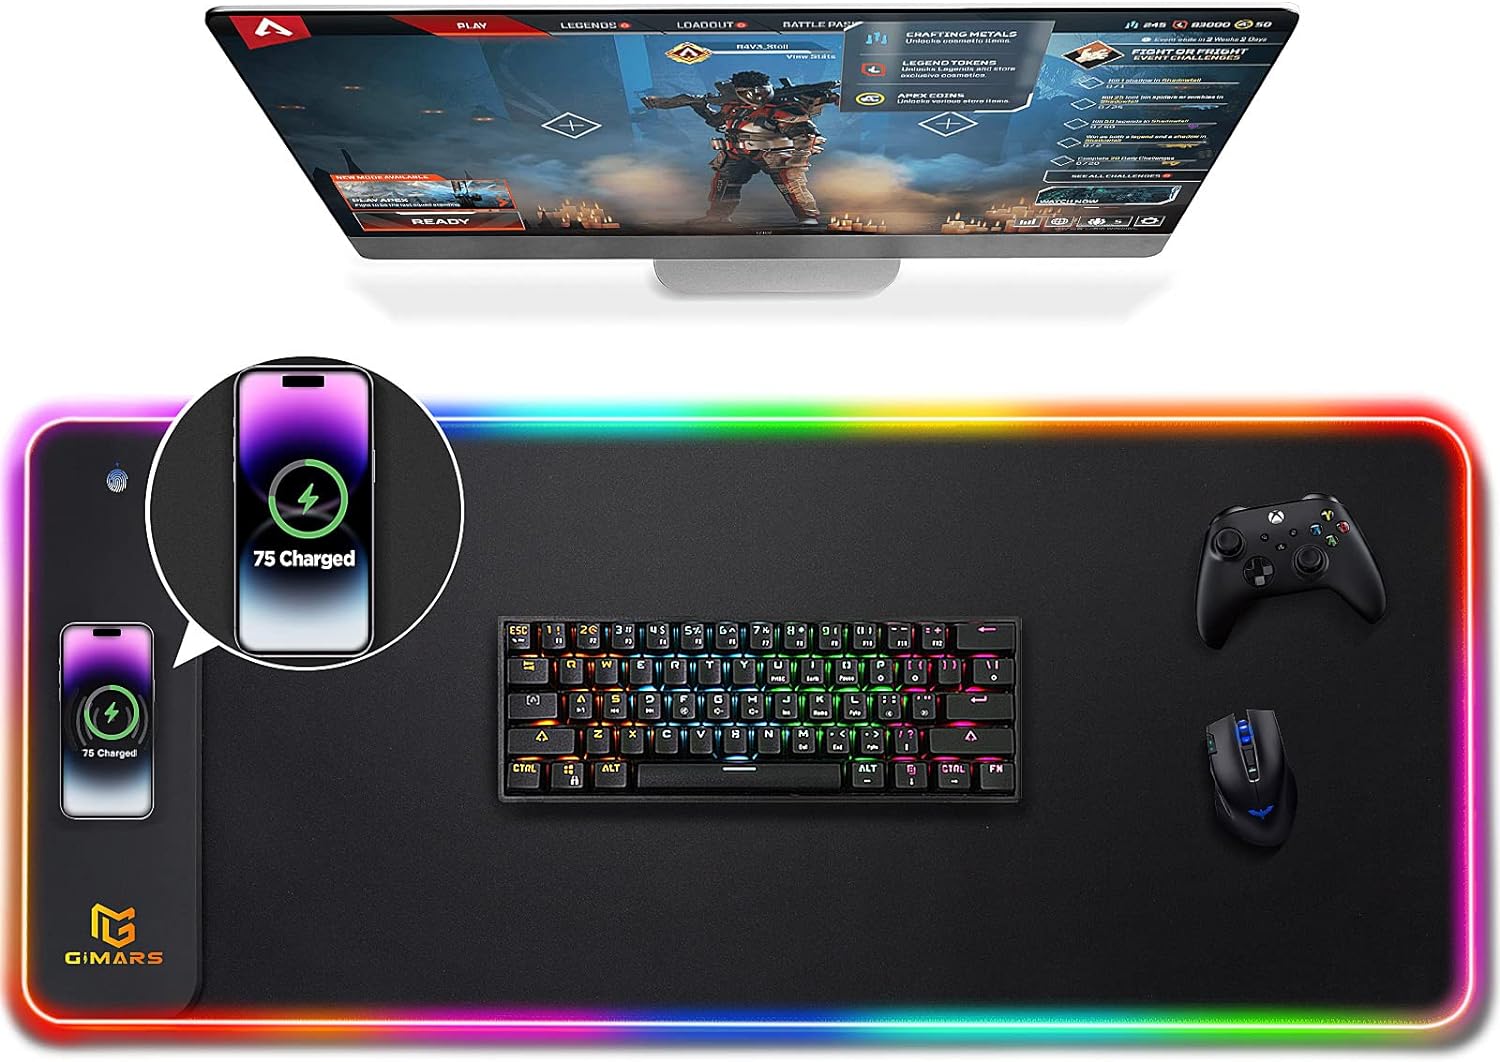 Gimars Upgrade RGB Mouse Pad with 15W Fast Wireless Charging, Extened Large LED Gaming Mouse Pad with 10 Colors LED Light, Premium Smooth Surface, Non Slip Mouse Mat for Gaming, Desks, PC, Office